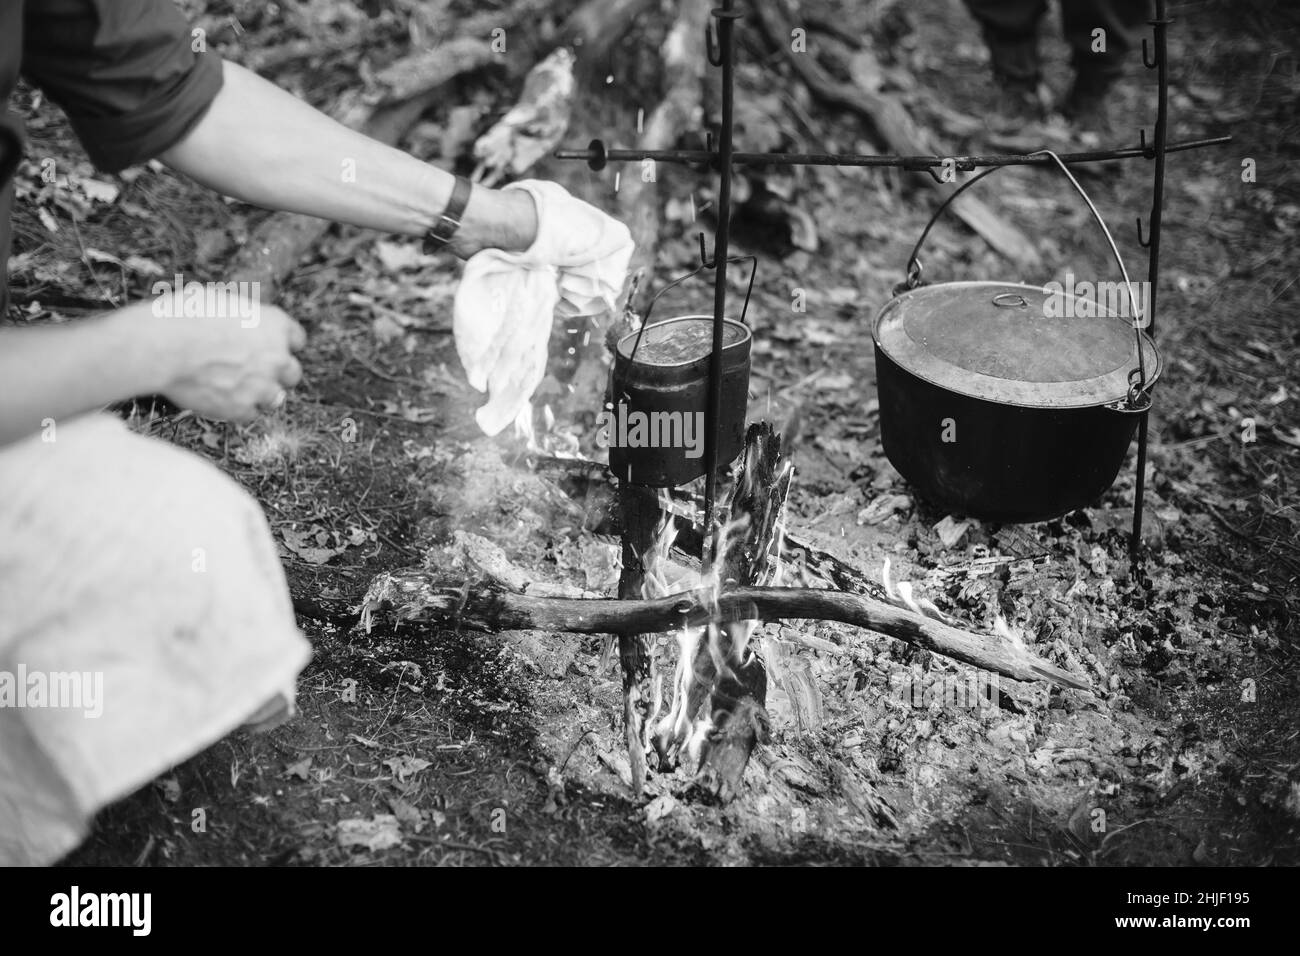 Re-enactor Dressed As World War II German Wehrmacht Soldier Cooking Food Over A Fire In An Old Marching Pot. Photo In Black And White Colors. Soldier Stock Photo